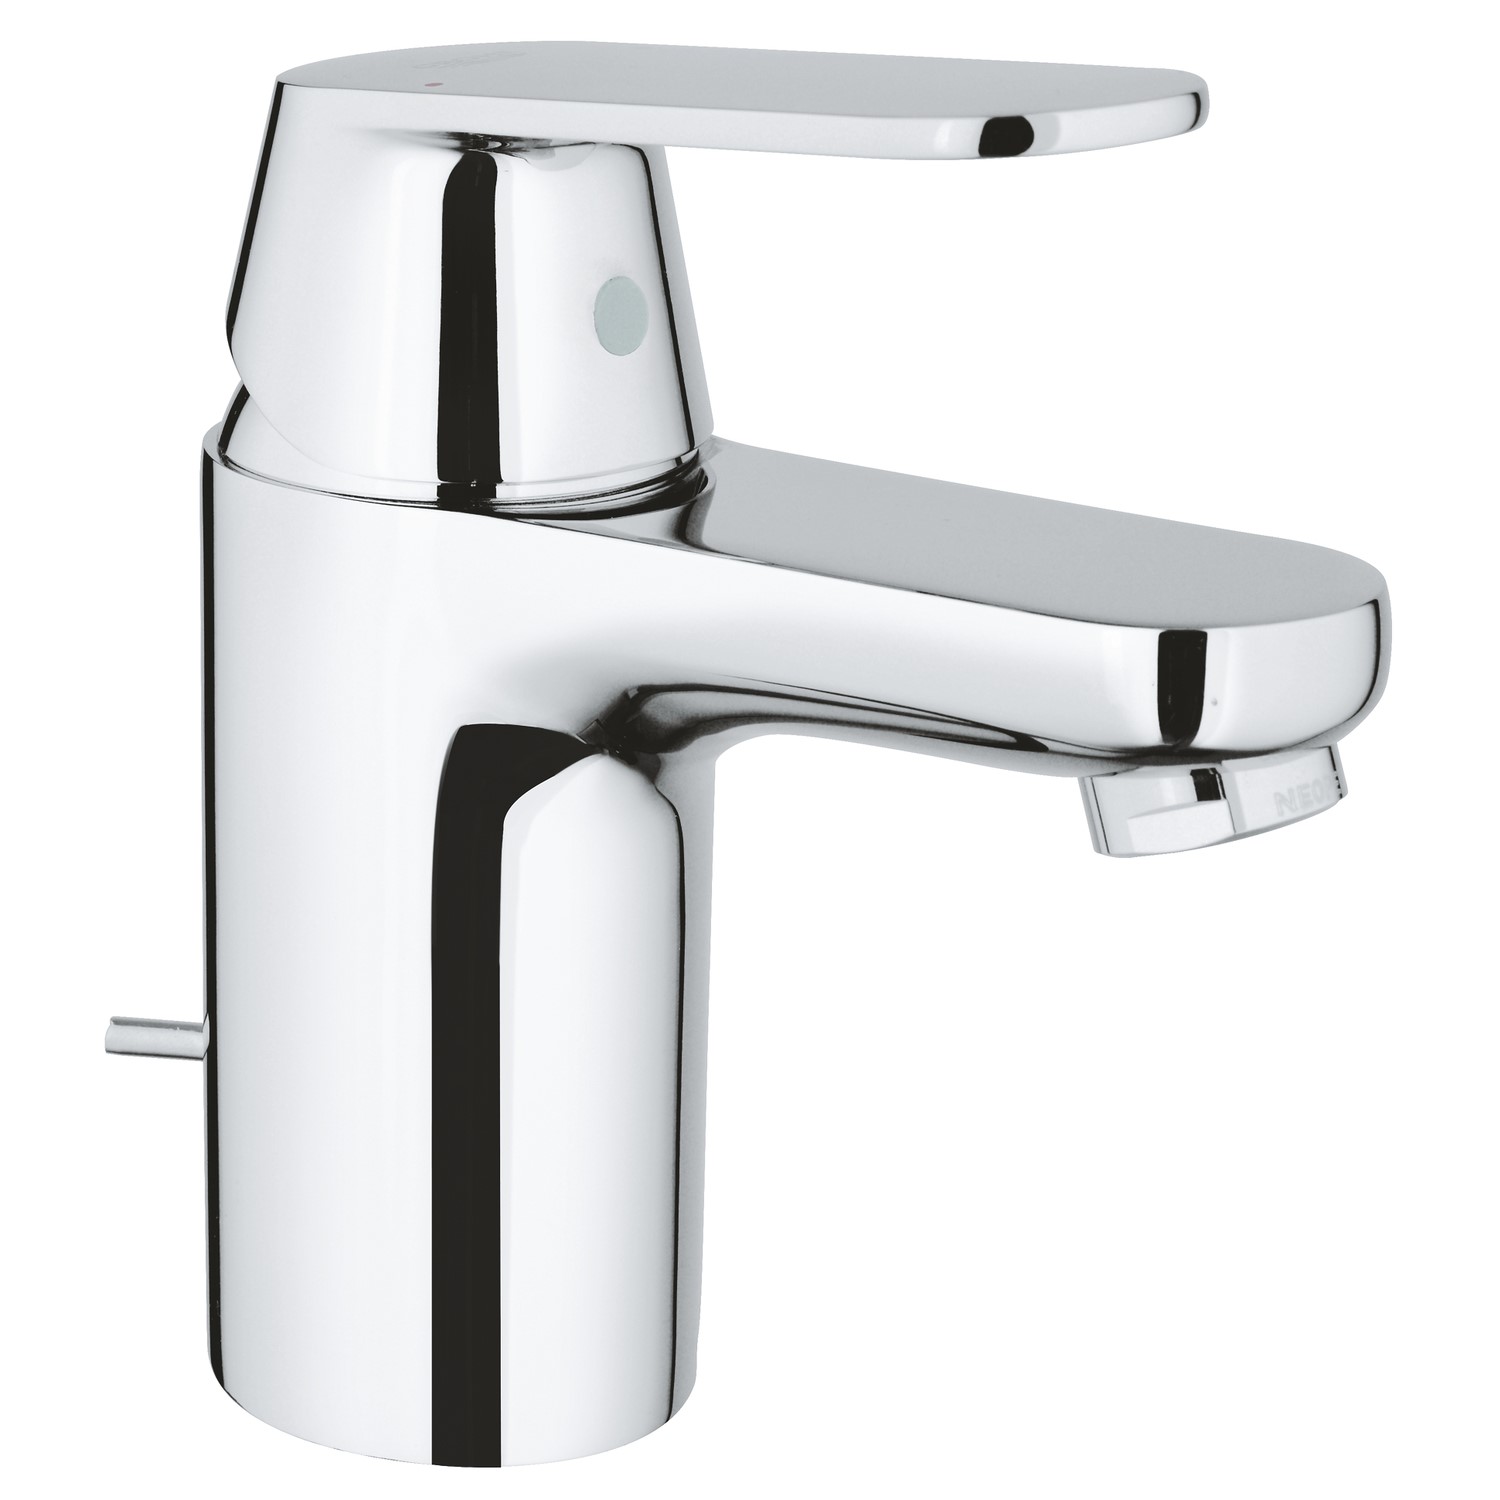 Eurosmart Cosmopolitan Cloakroom Basin Mixer Tap with Waste - Grohe